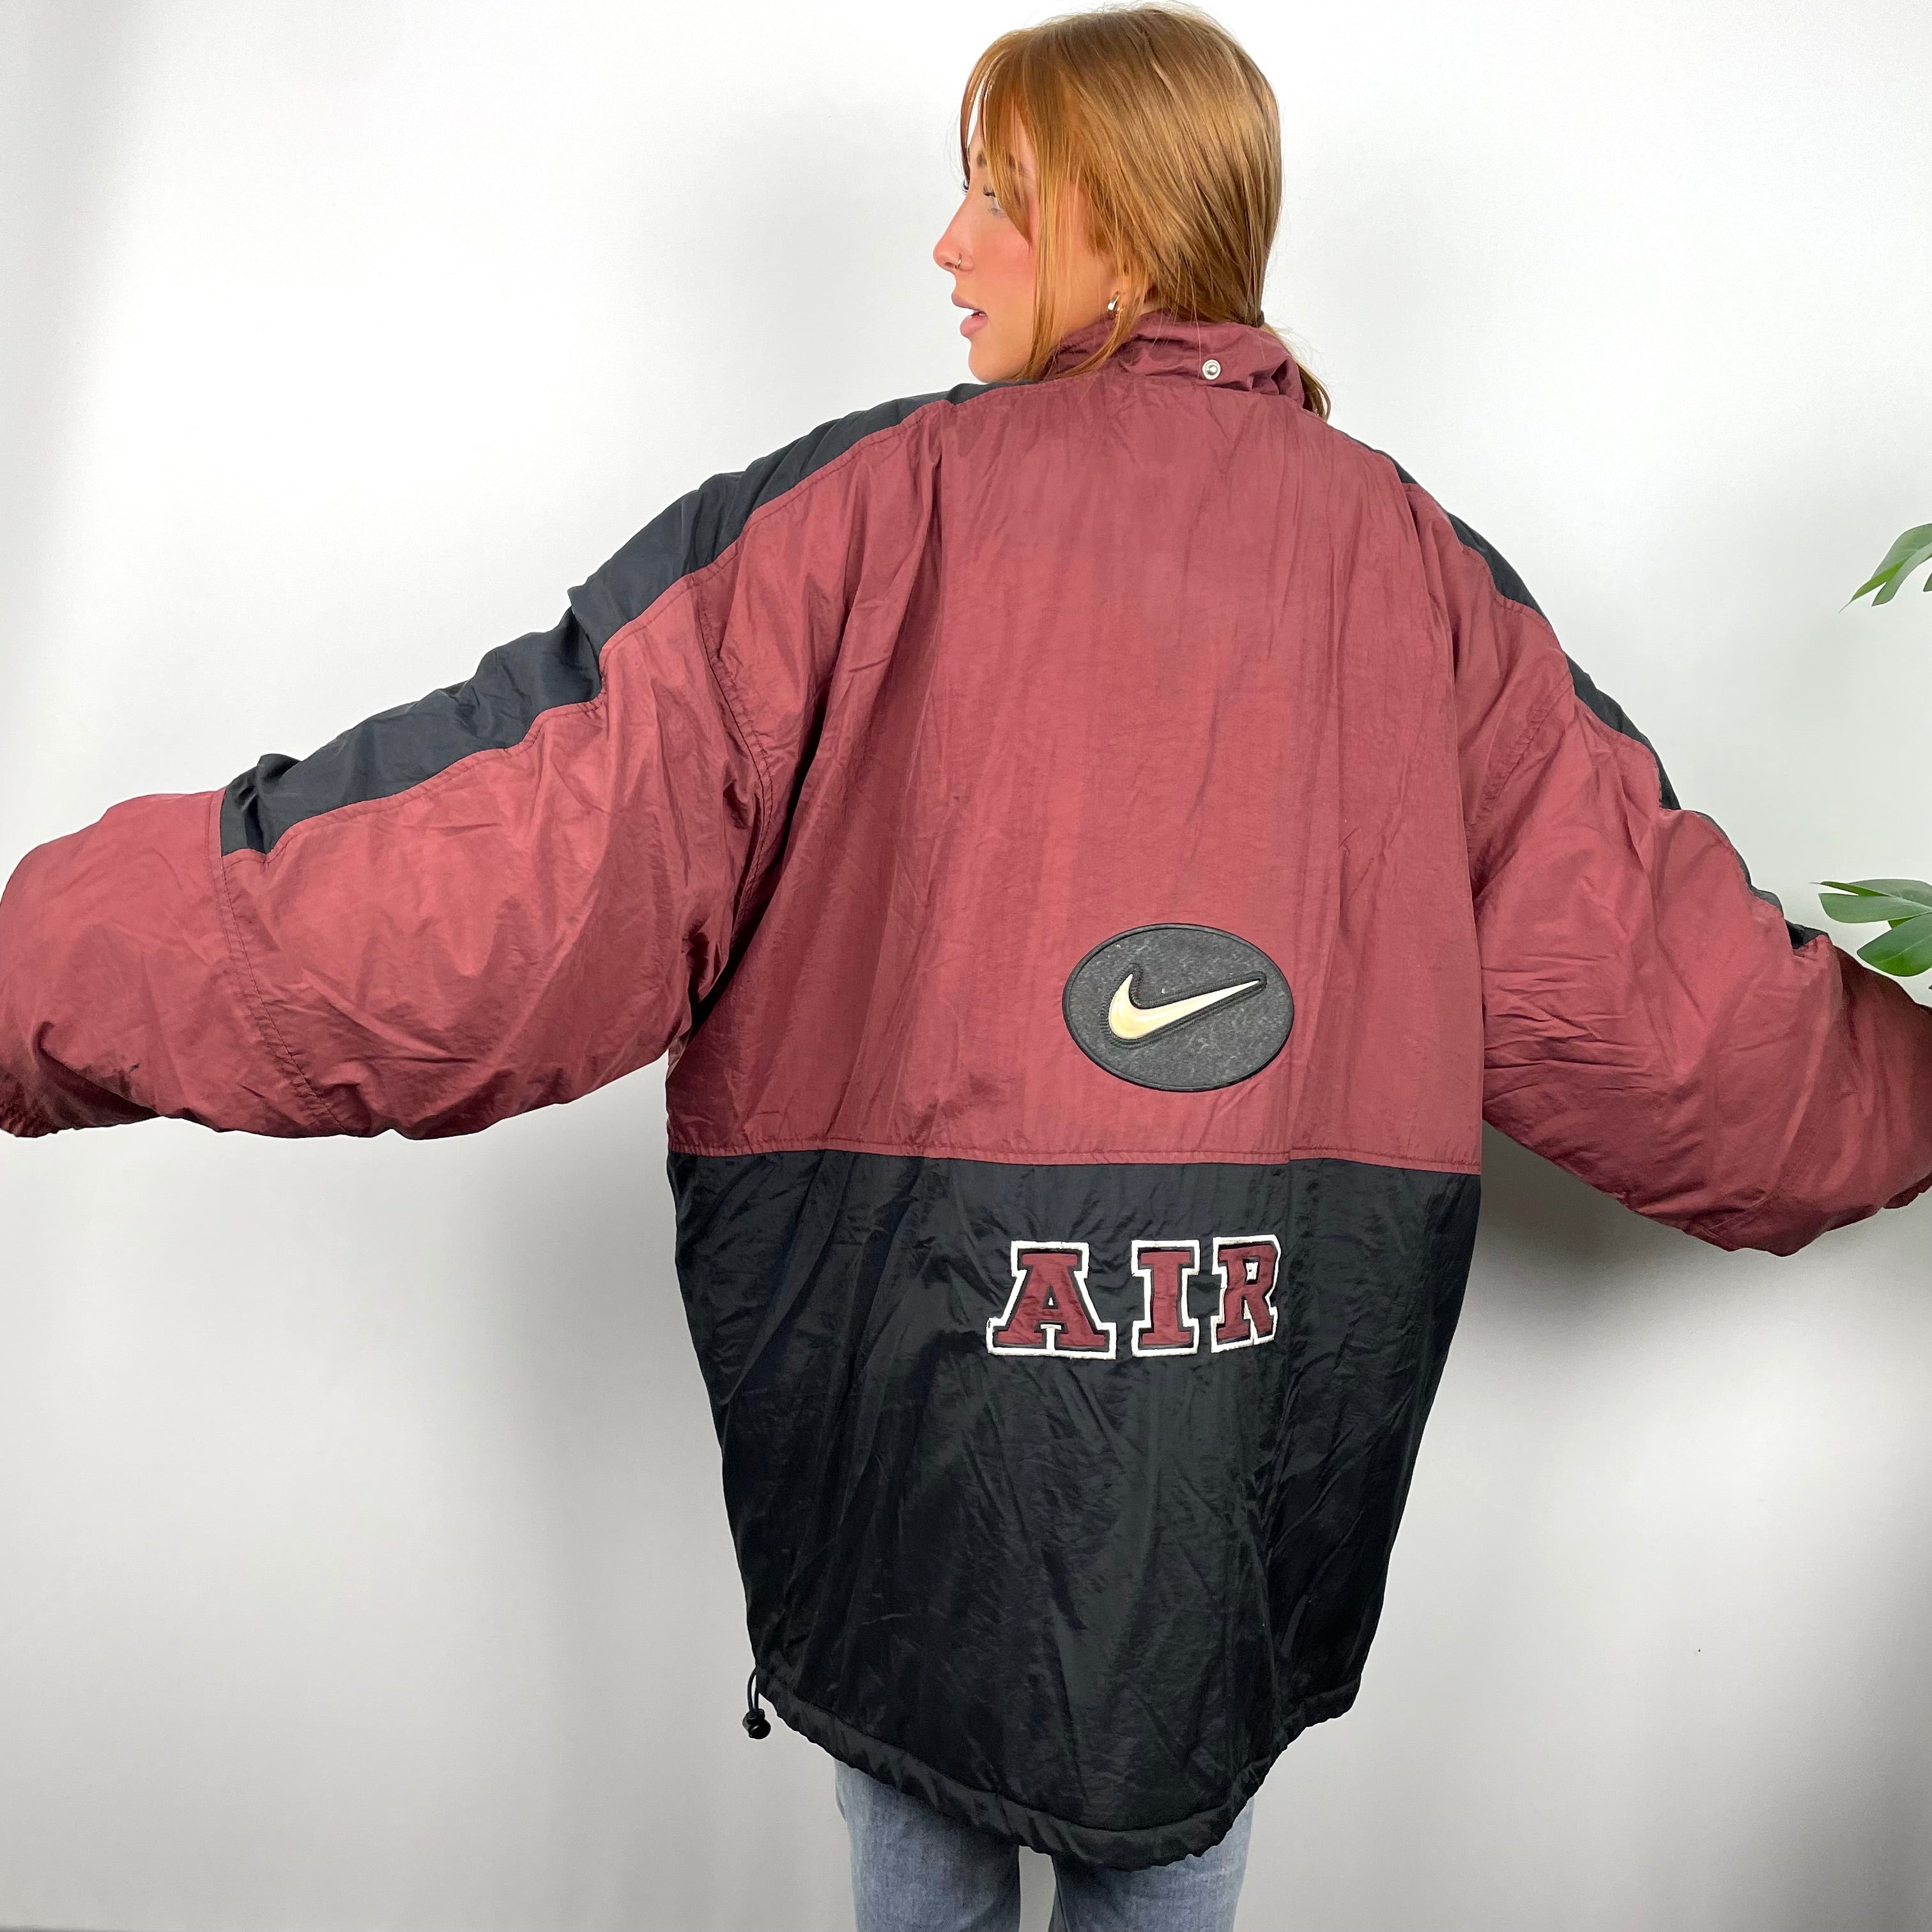 Nike Air RARE Burgundy and Black Embroidered Spell Out Padded Jacket (3XL)